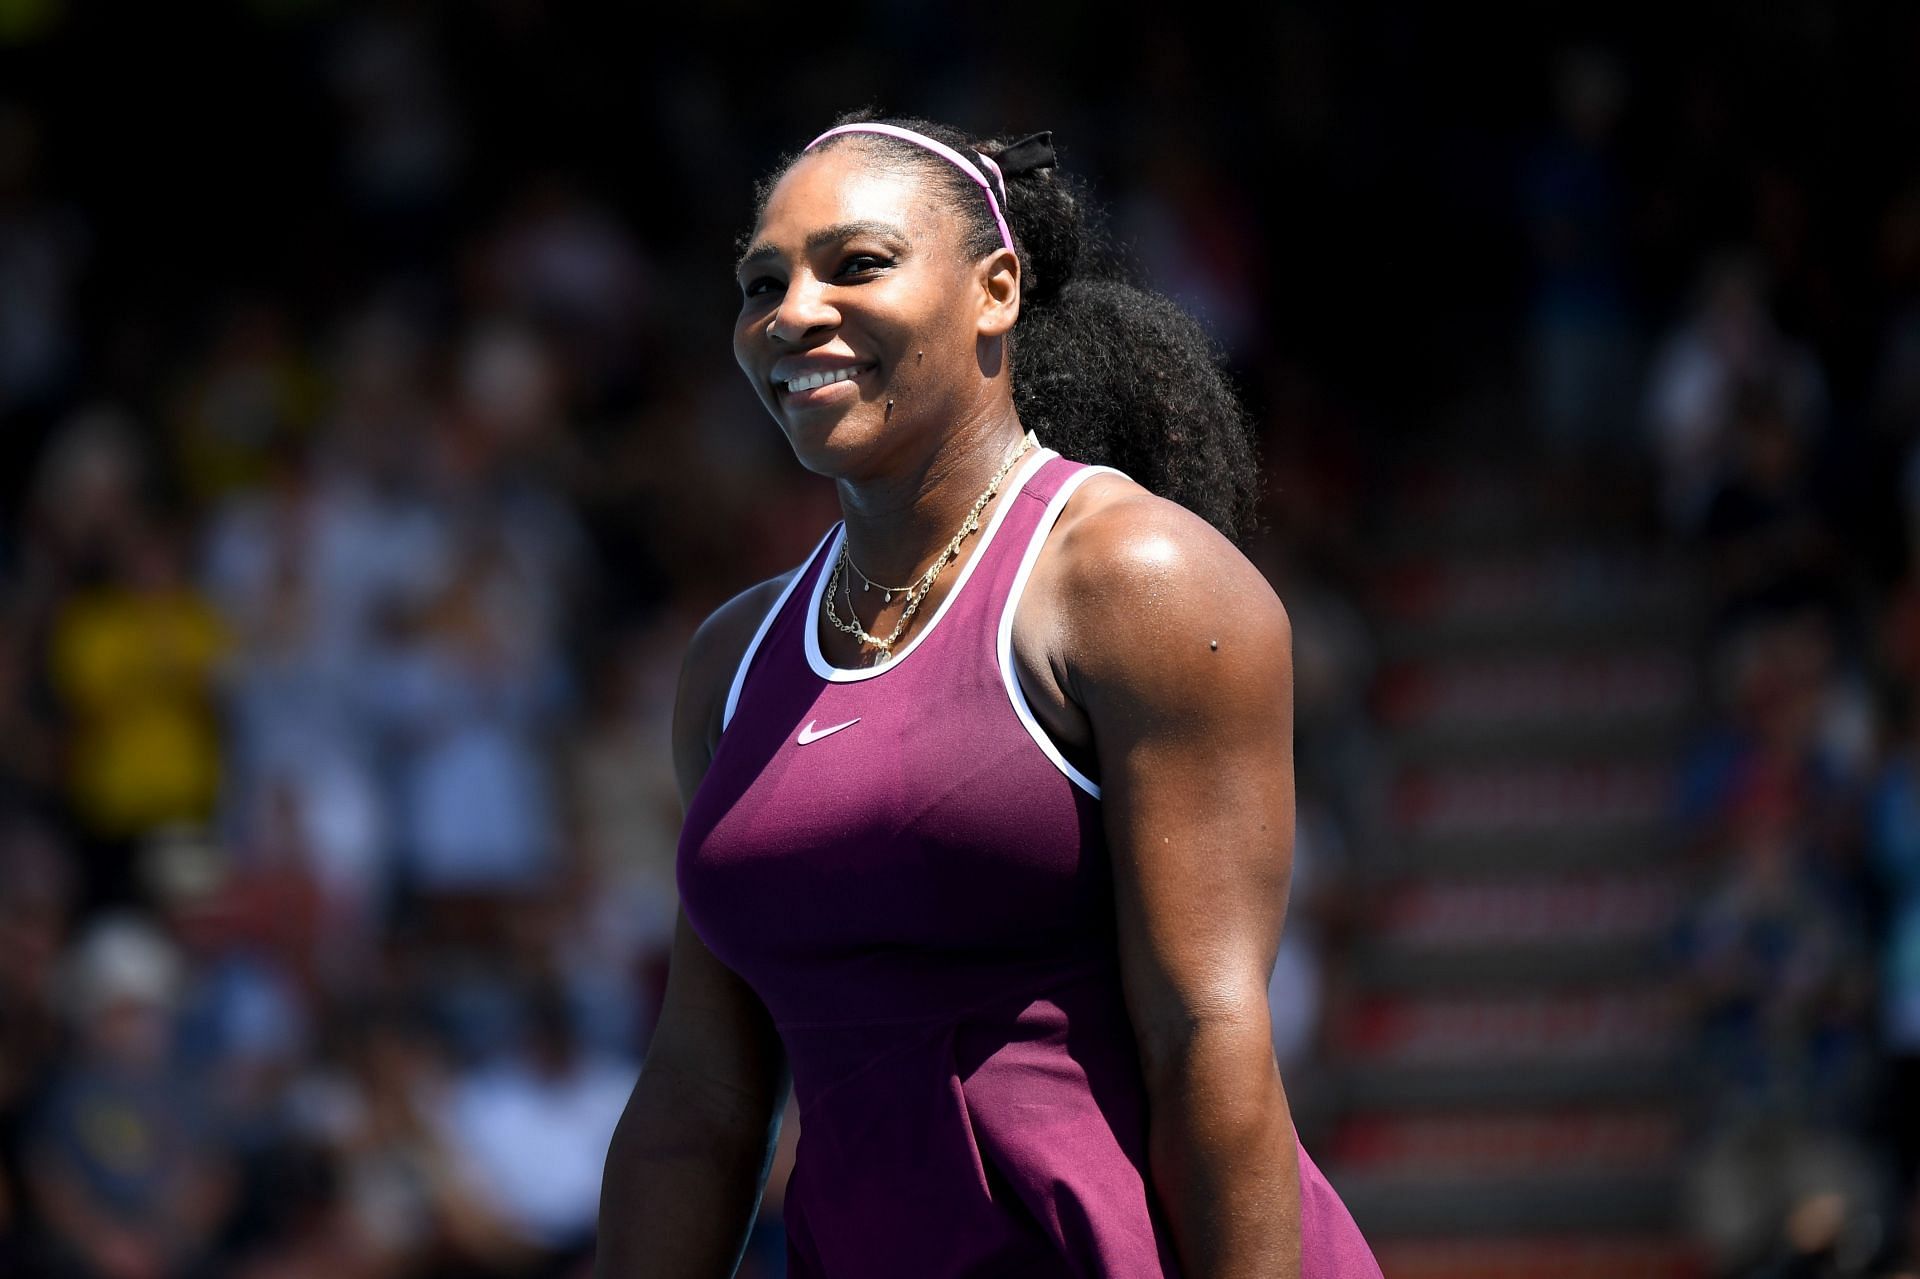 Serena Williams spoke about supporting women and minority-owned businesses.